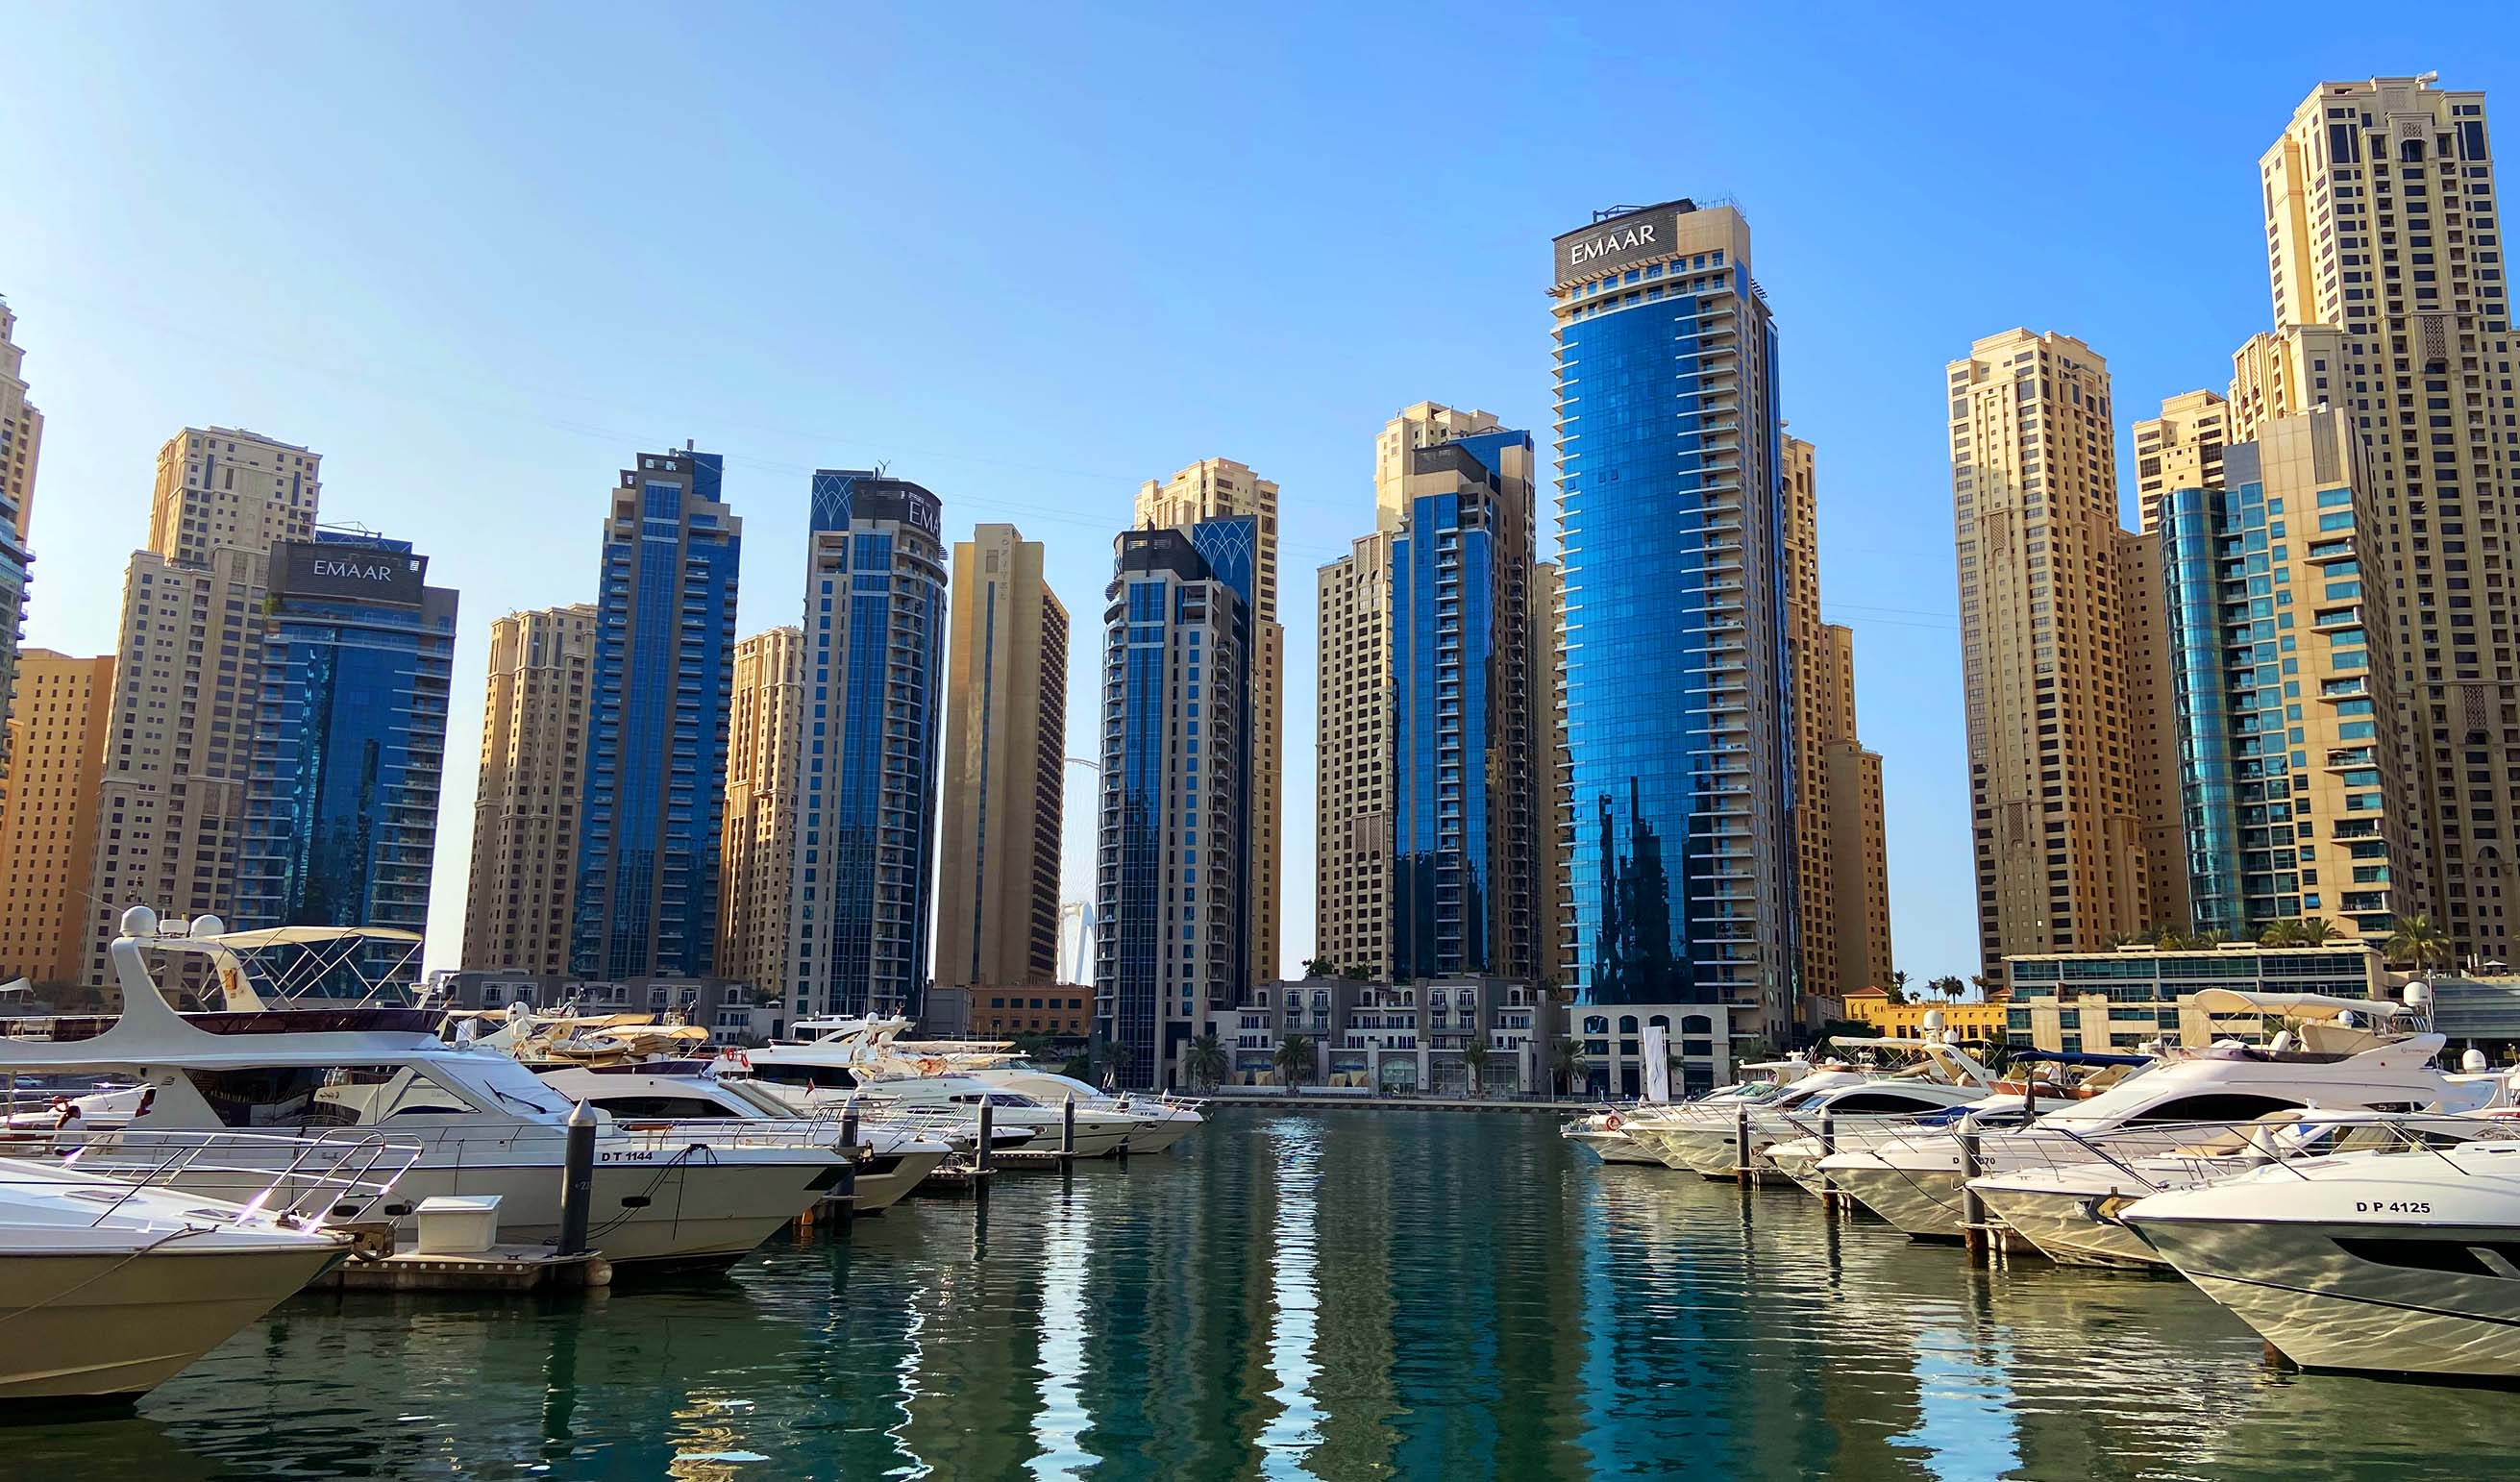 Sightseeing Boat Day Tour in Dubai